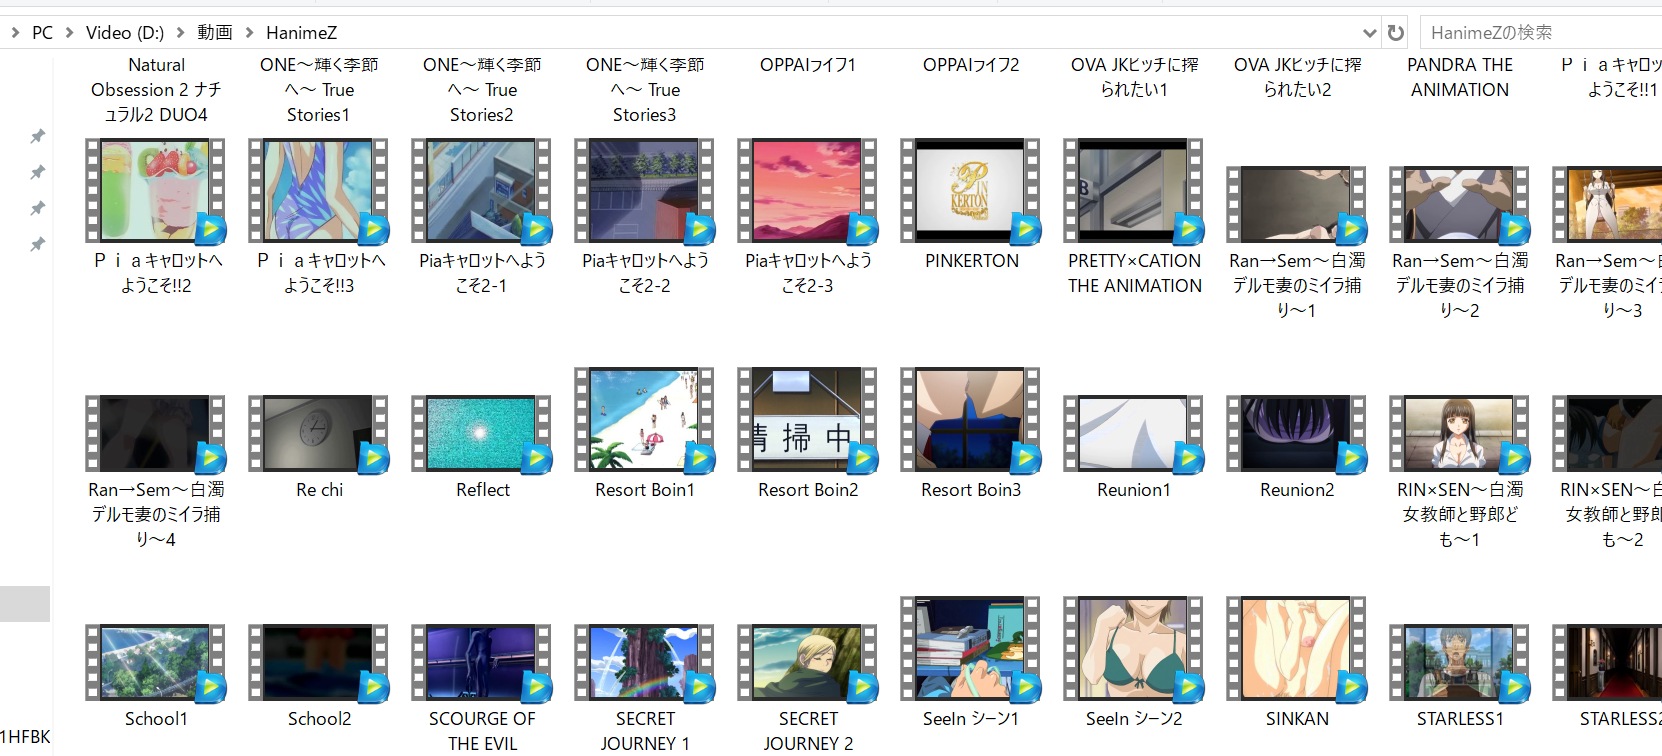 some of the hentai that I downloaded when I was a member of HanimeZ